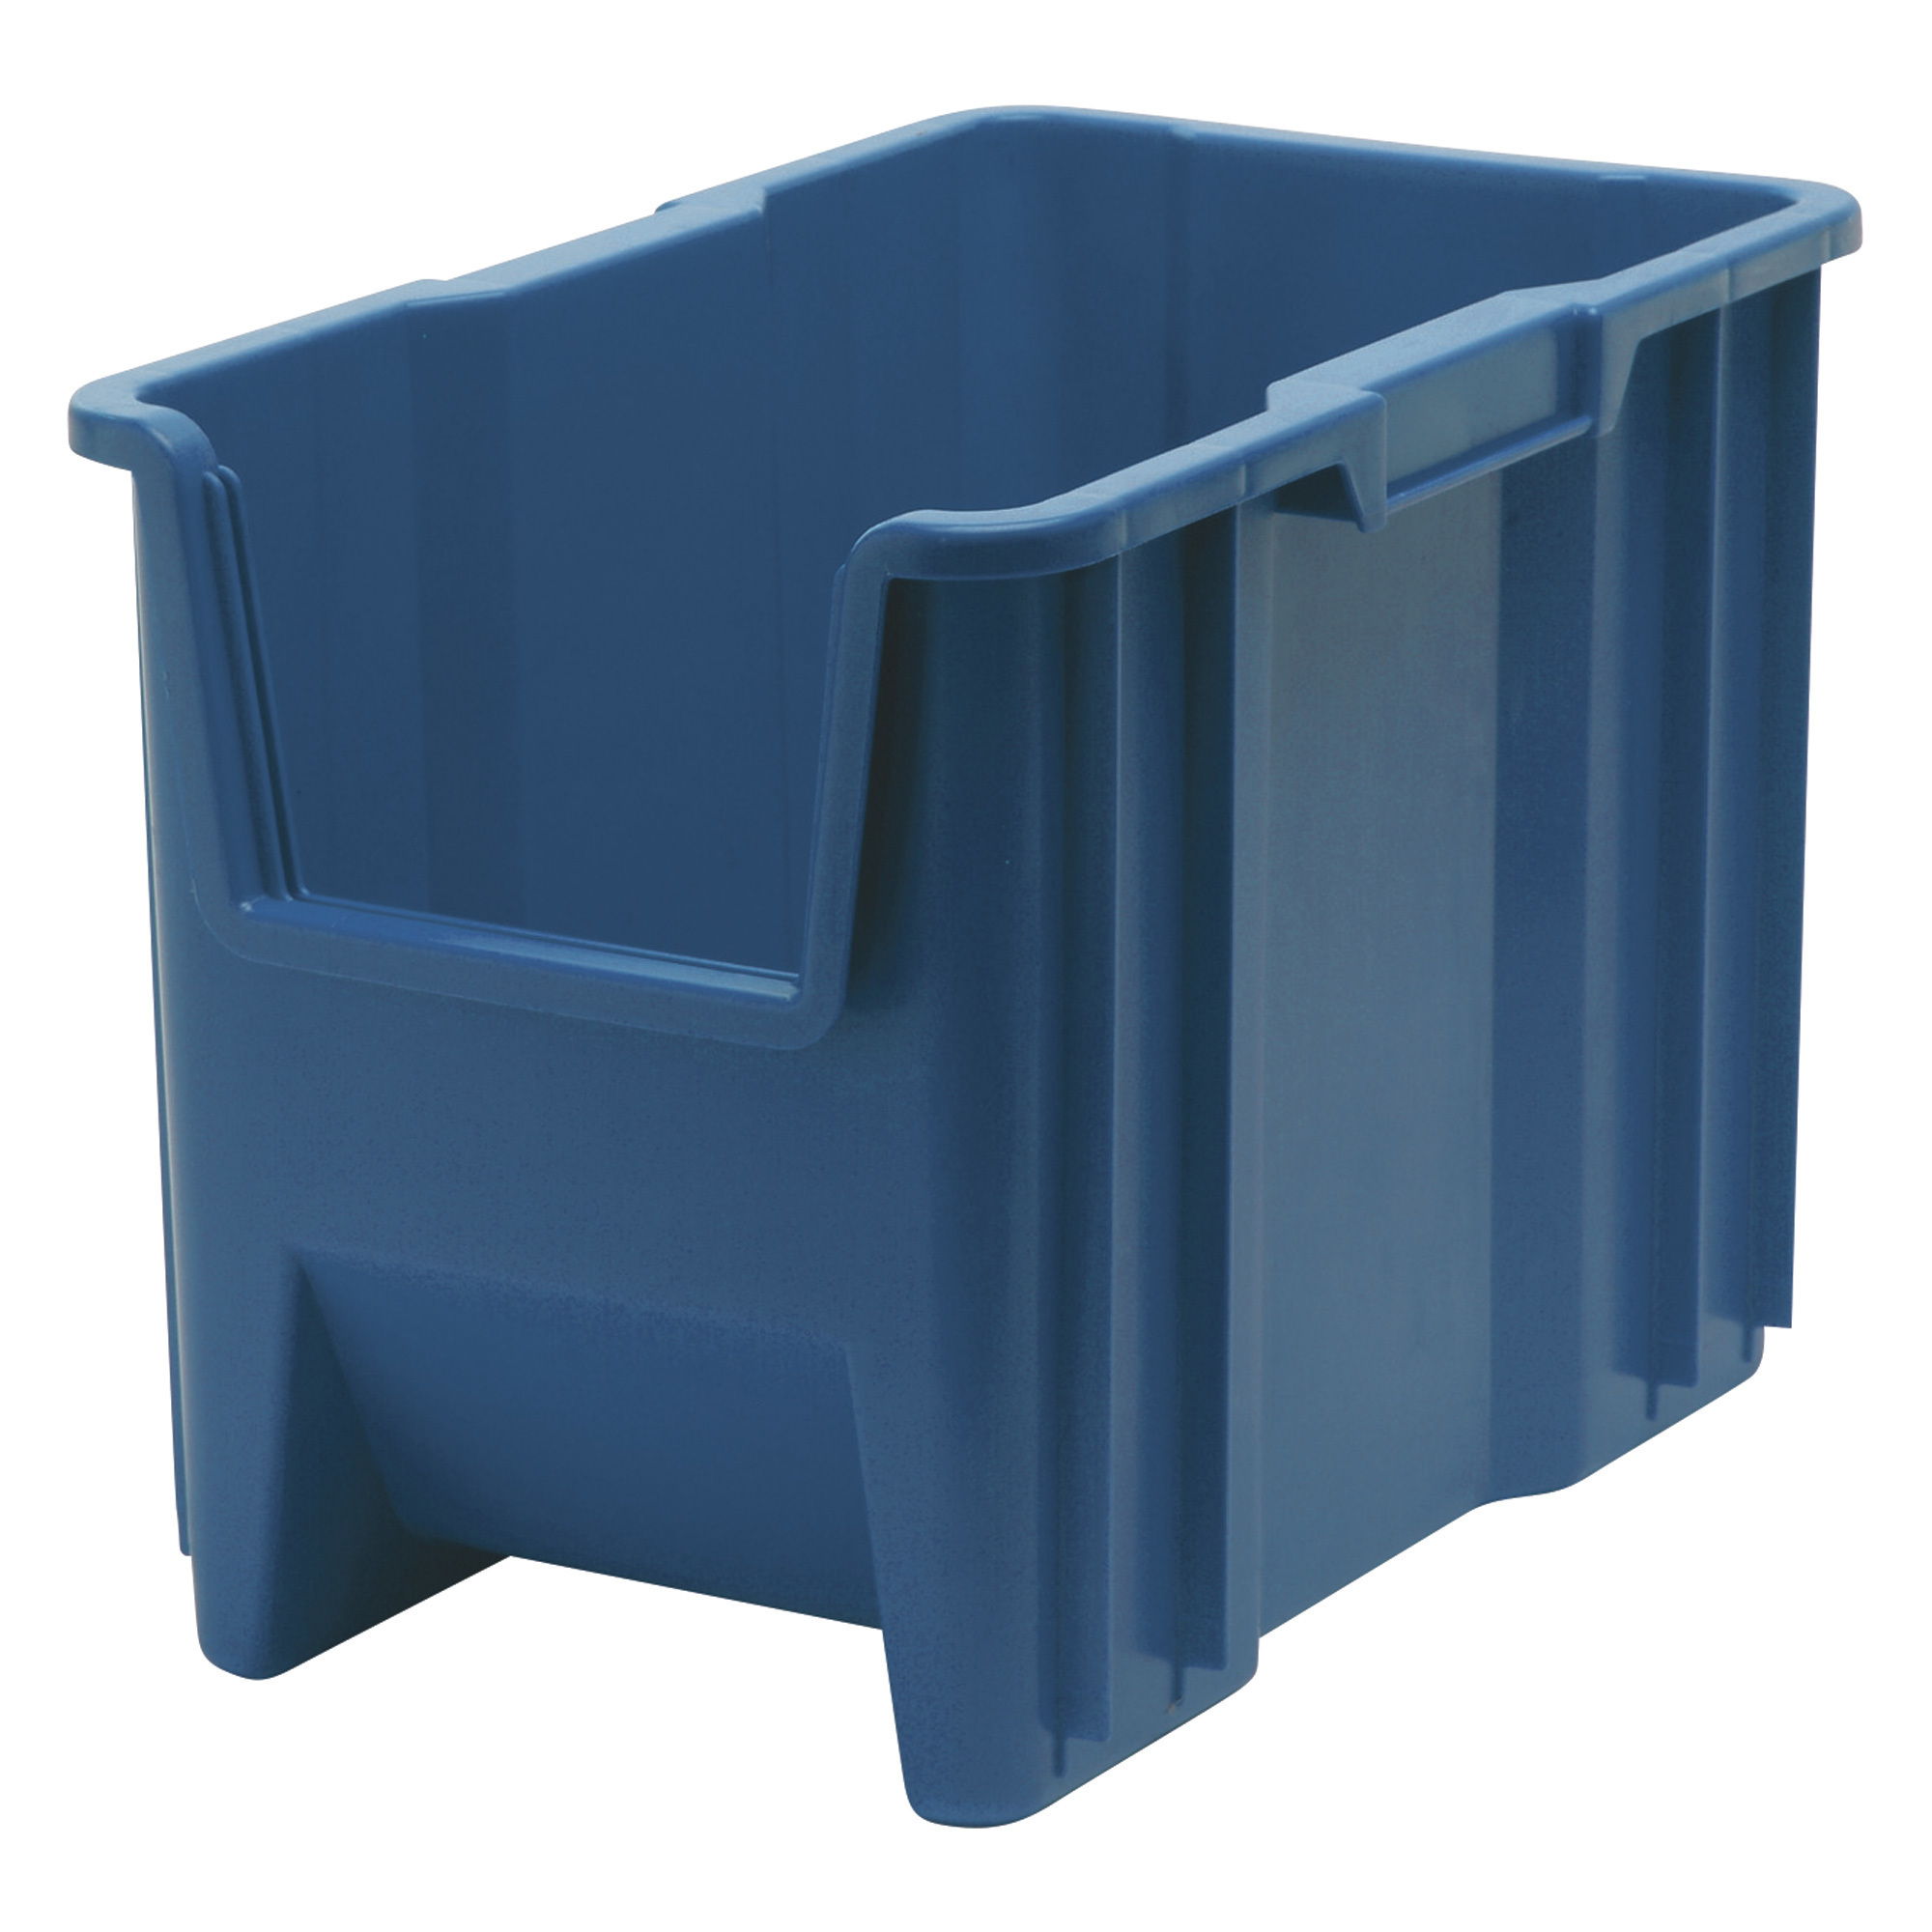 Quantum Storage Giant Stack Container, 4-Pack, 17 1/2Inch L x 10 7/8Inch W x 12 1/2Inch H, Blue, Model QGH600BLCS